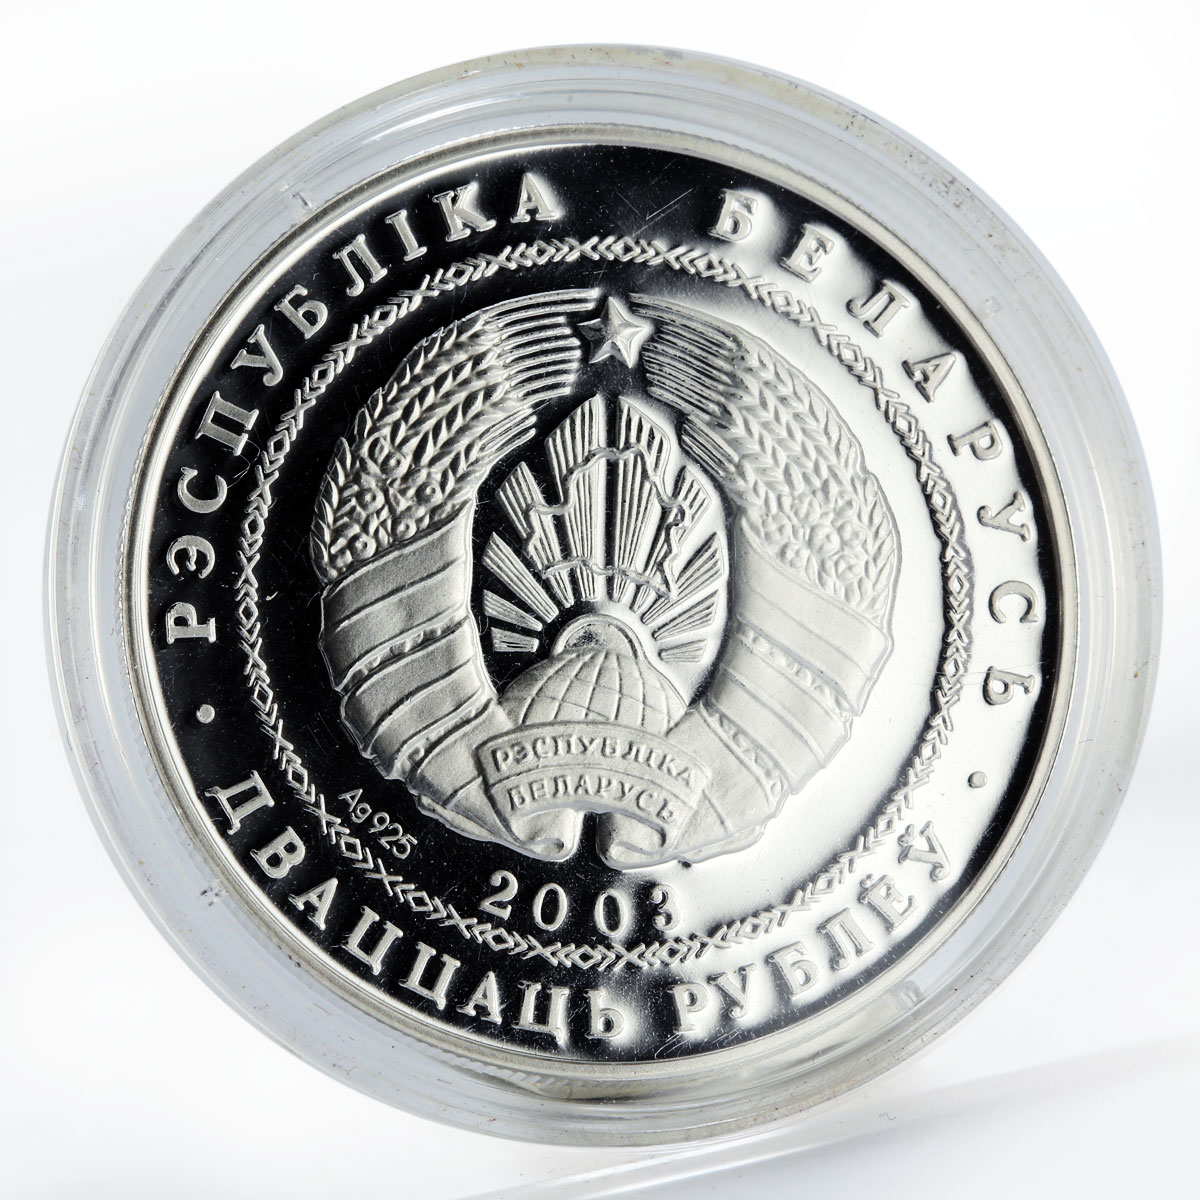 Belarus 20 rubles Shot Put Olympic Games proof silver coin 2003